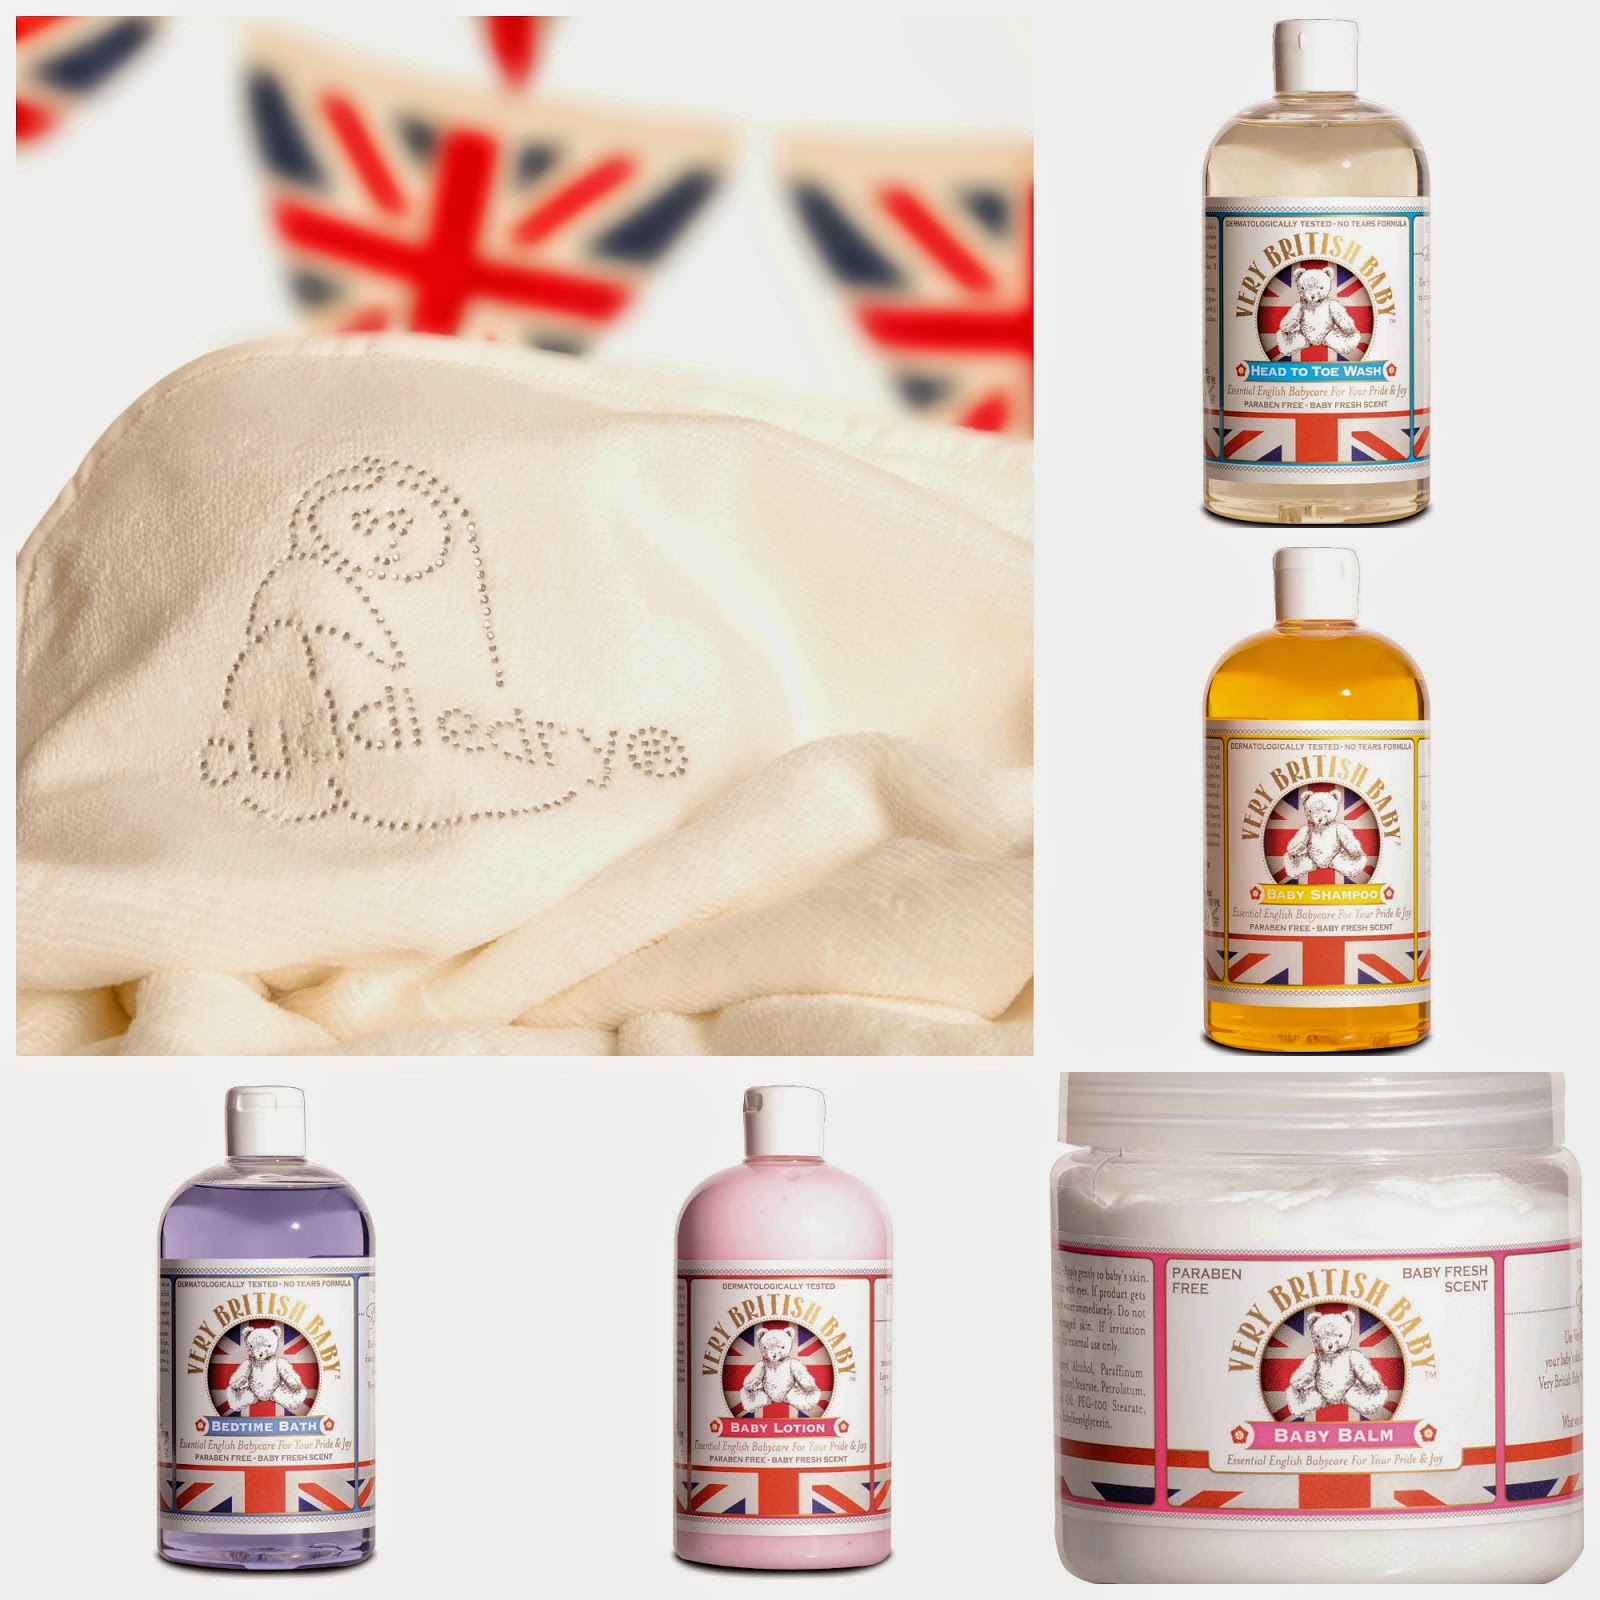 mamasVIB | V. I. BABY: Stylish ways to celebrate the arrival of the Royal Baby  | royal baby | royal | duke and duchess of cmabridge | kate middleton | prince george | new baby | royal baby | marsk and spencer | limited edition biscuit tin | miff and the royal baby | joules royal baby clothes | children salon | new royal birth | george | baby boy | baby girl | princess | kate | willima | prince william | pregnancy | royal news | stylish buys | shopping | mamasVIB